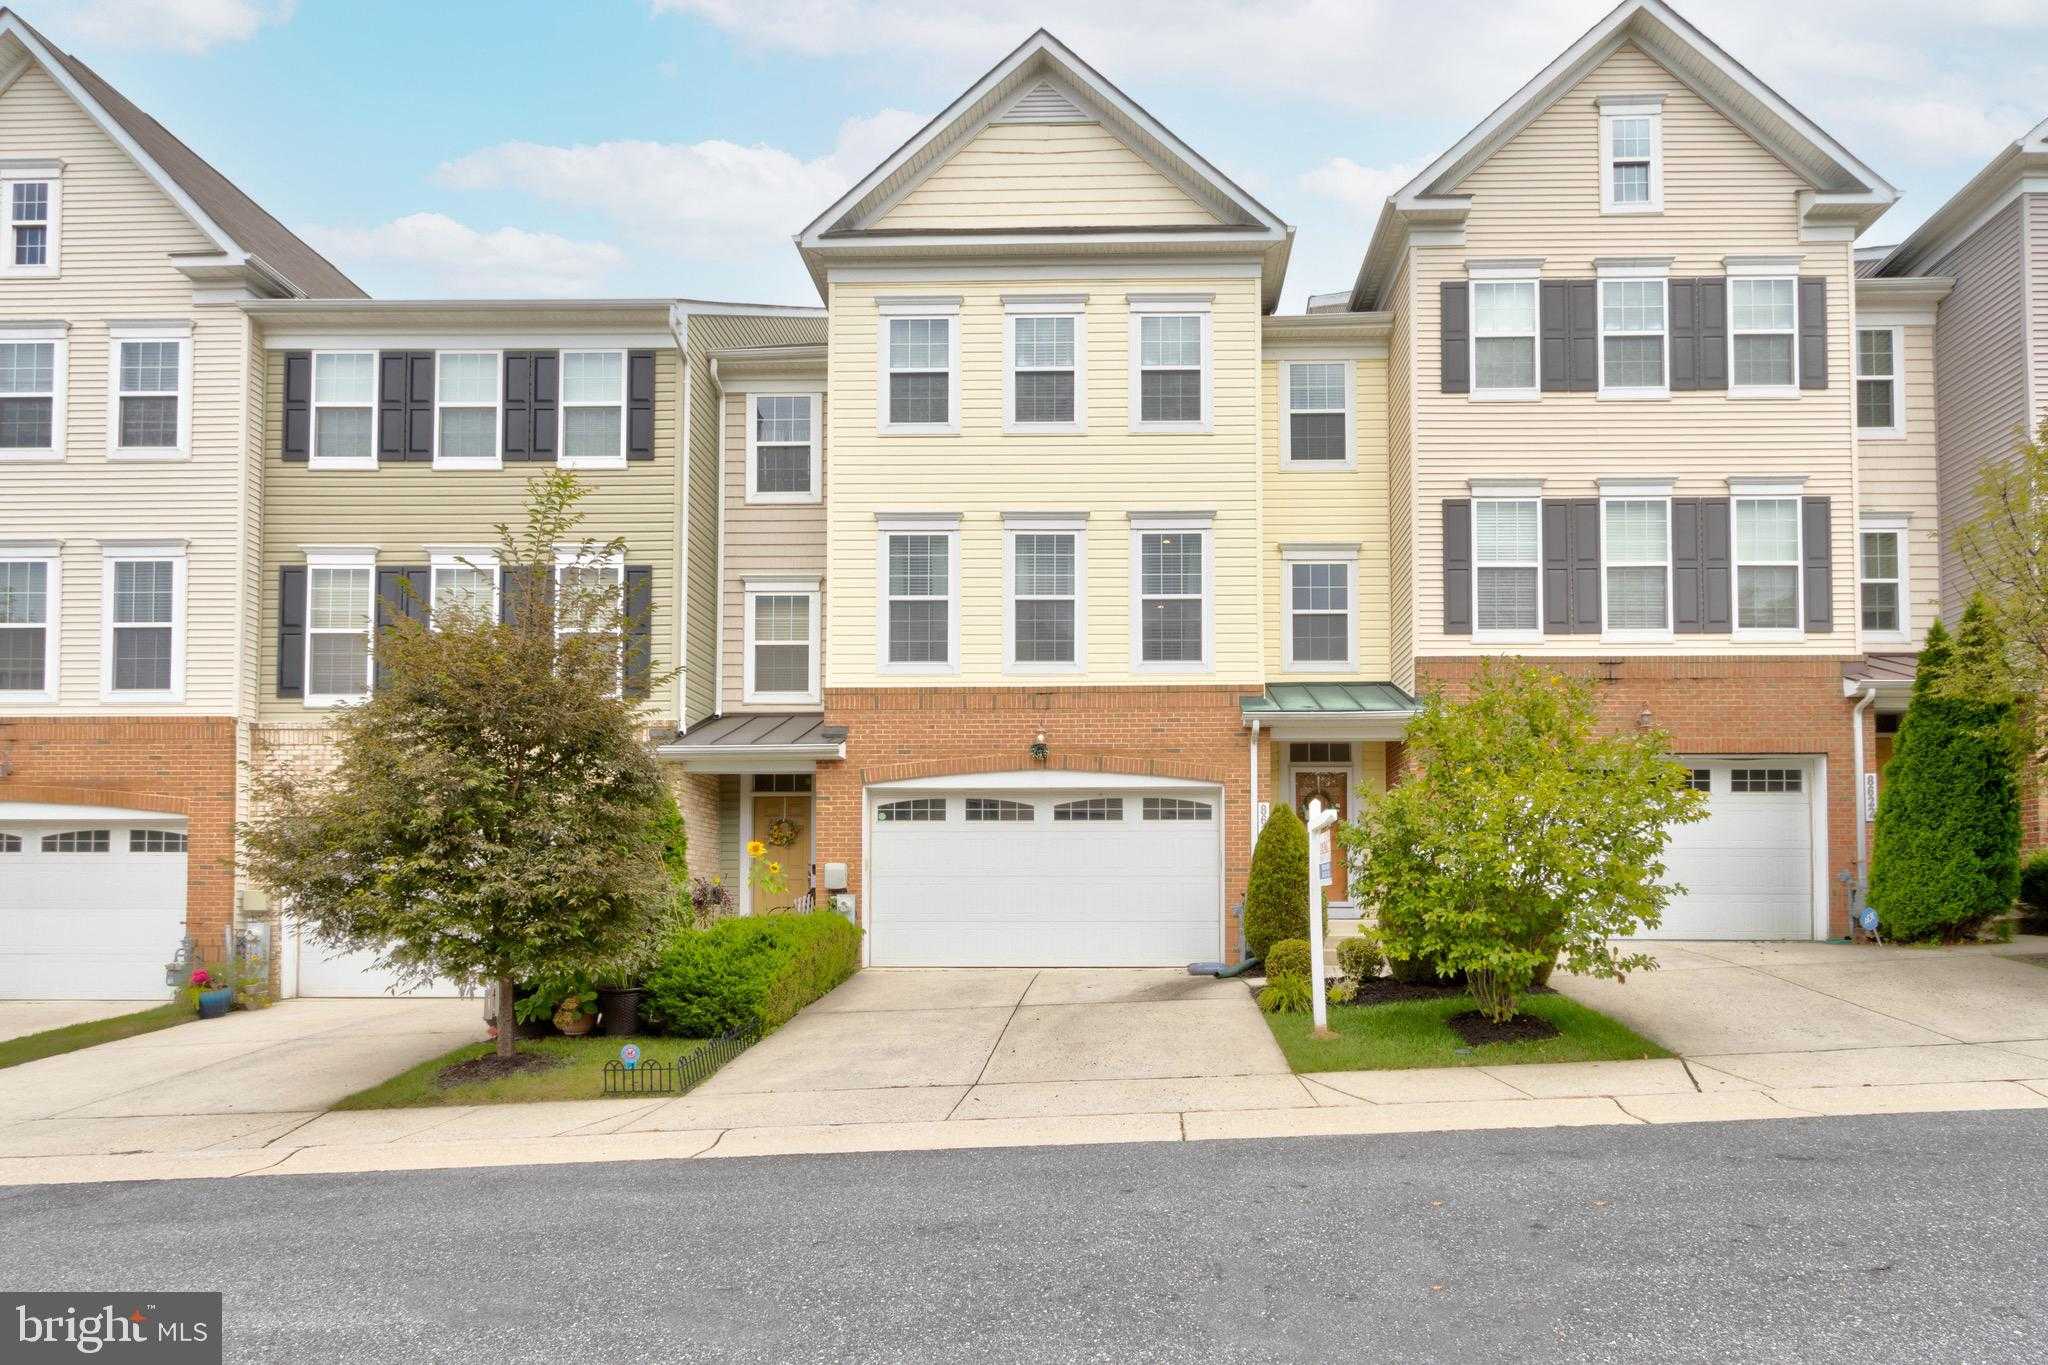 View LAUREL, MD 20723 townhome